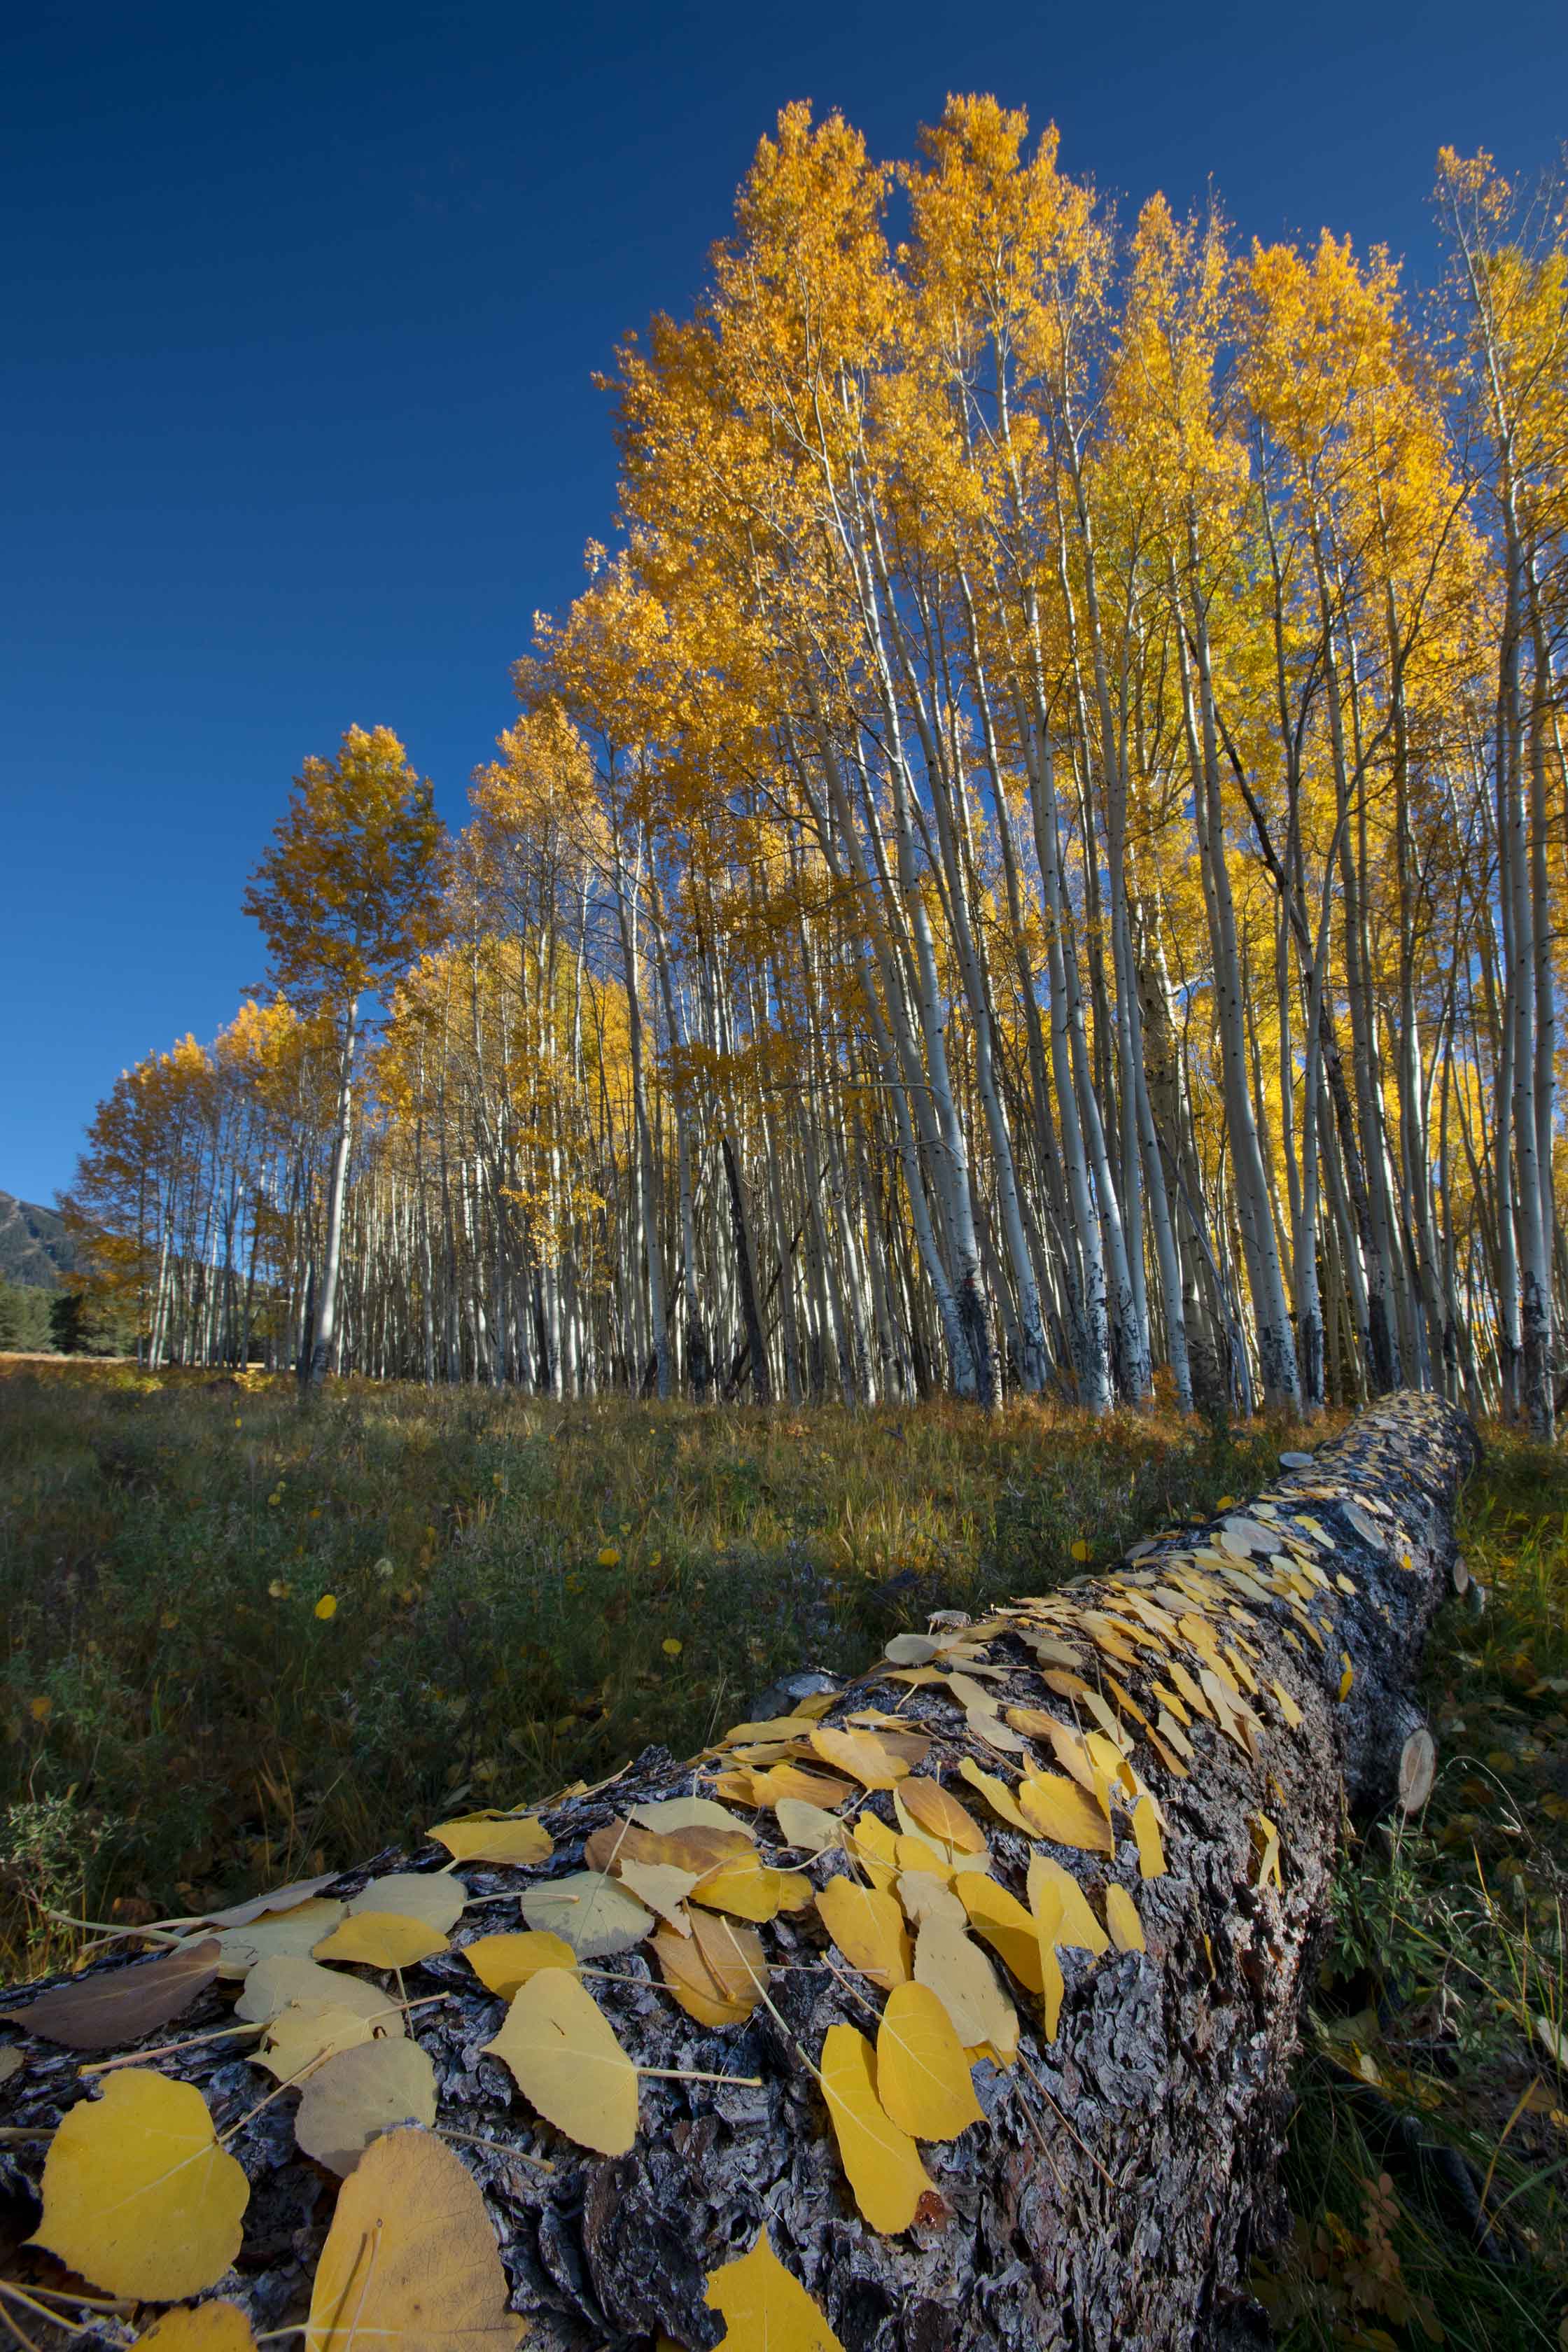 Aspen trees in autumn on the lower slopes of the San Francisco Peaks, northern Arizona